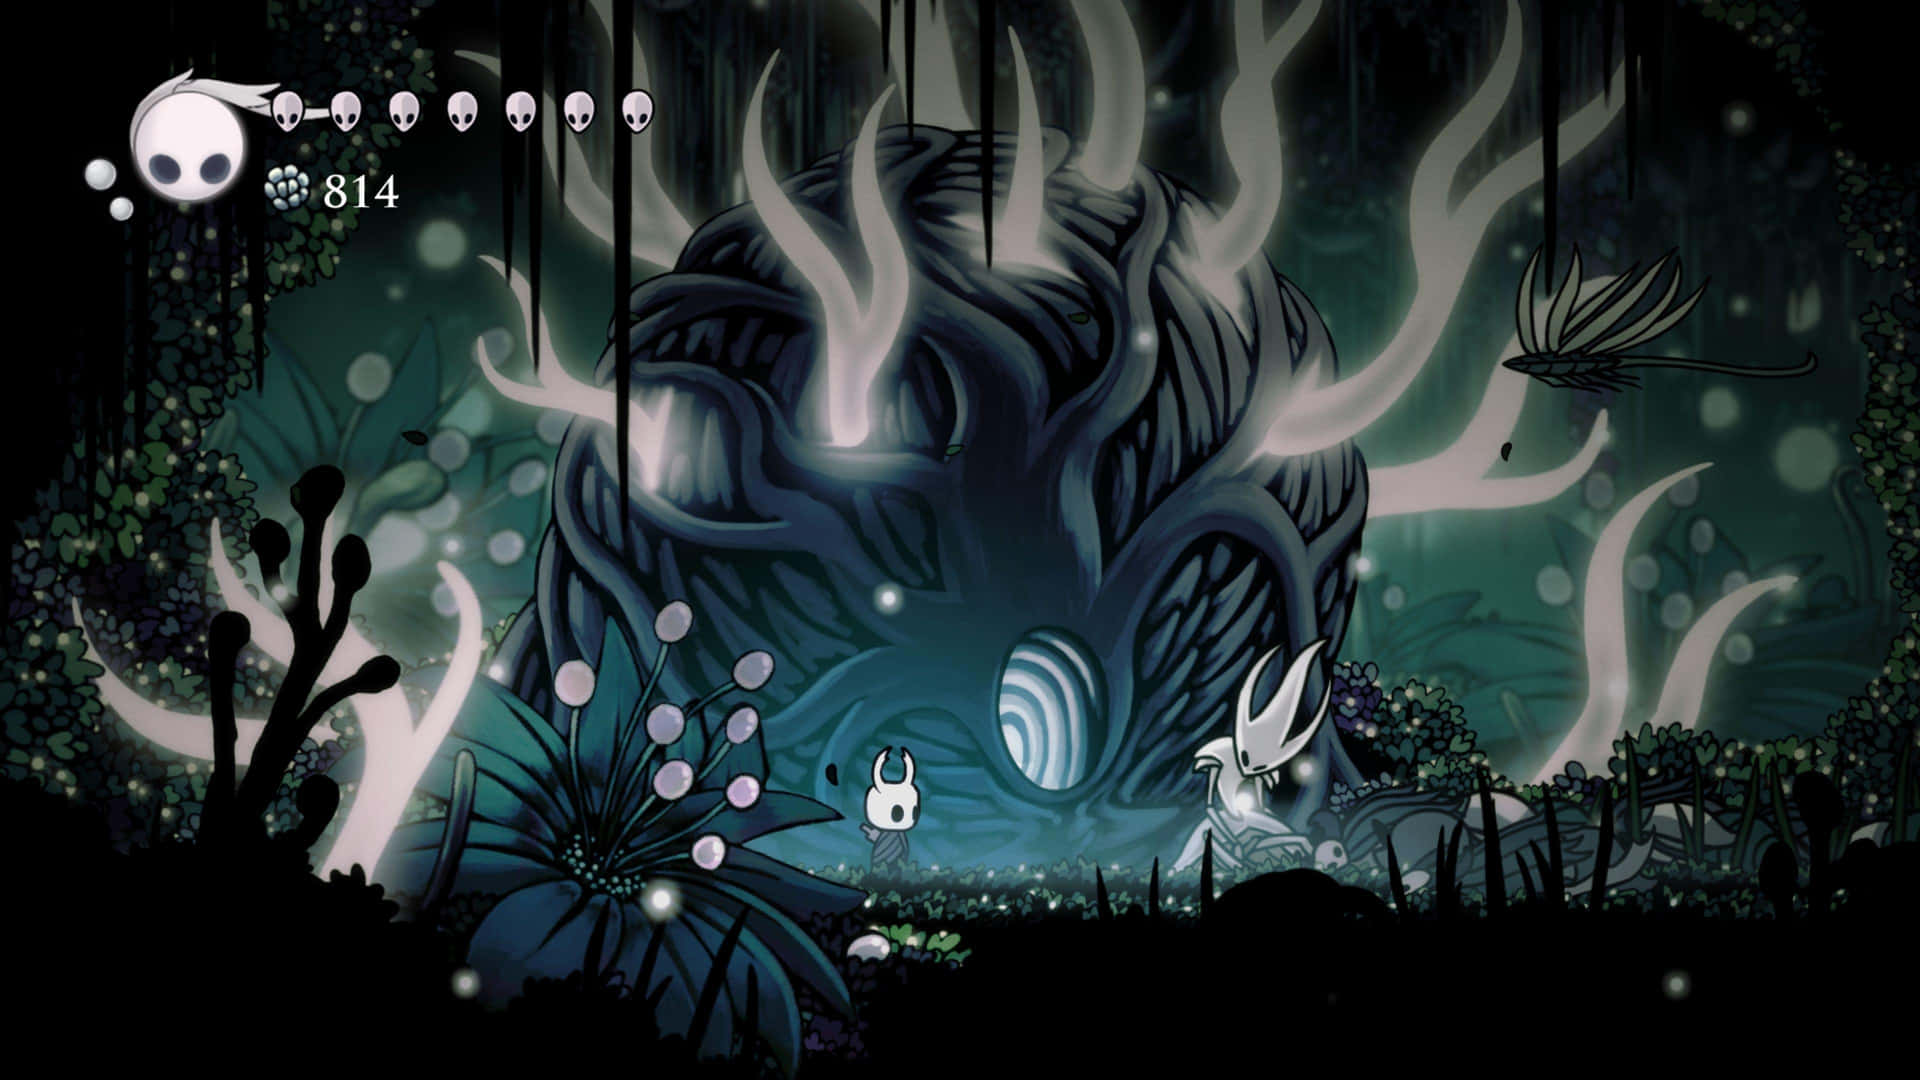 Explore the Handcrafted Depths of Hallownest in 'Hollow Knight'